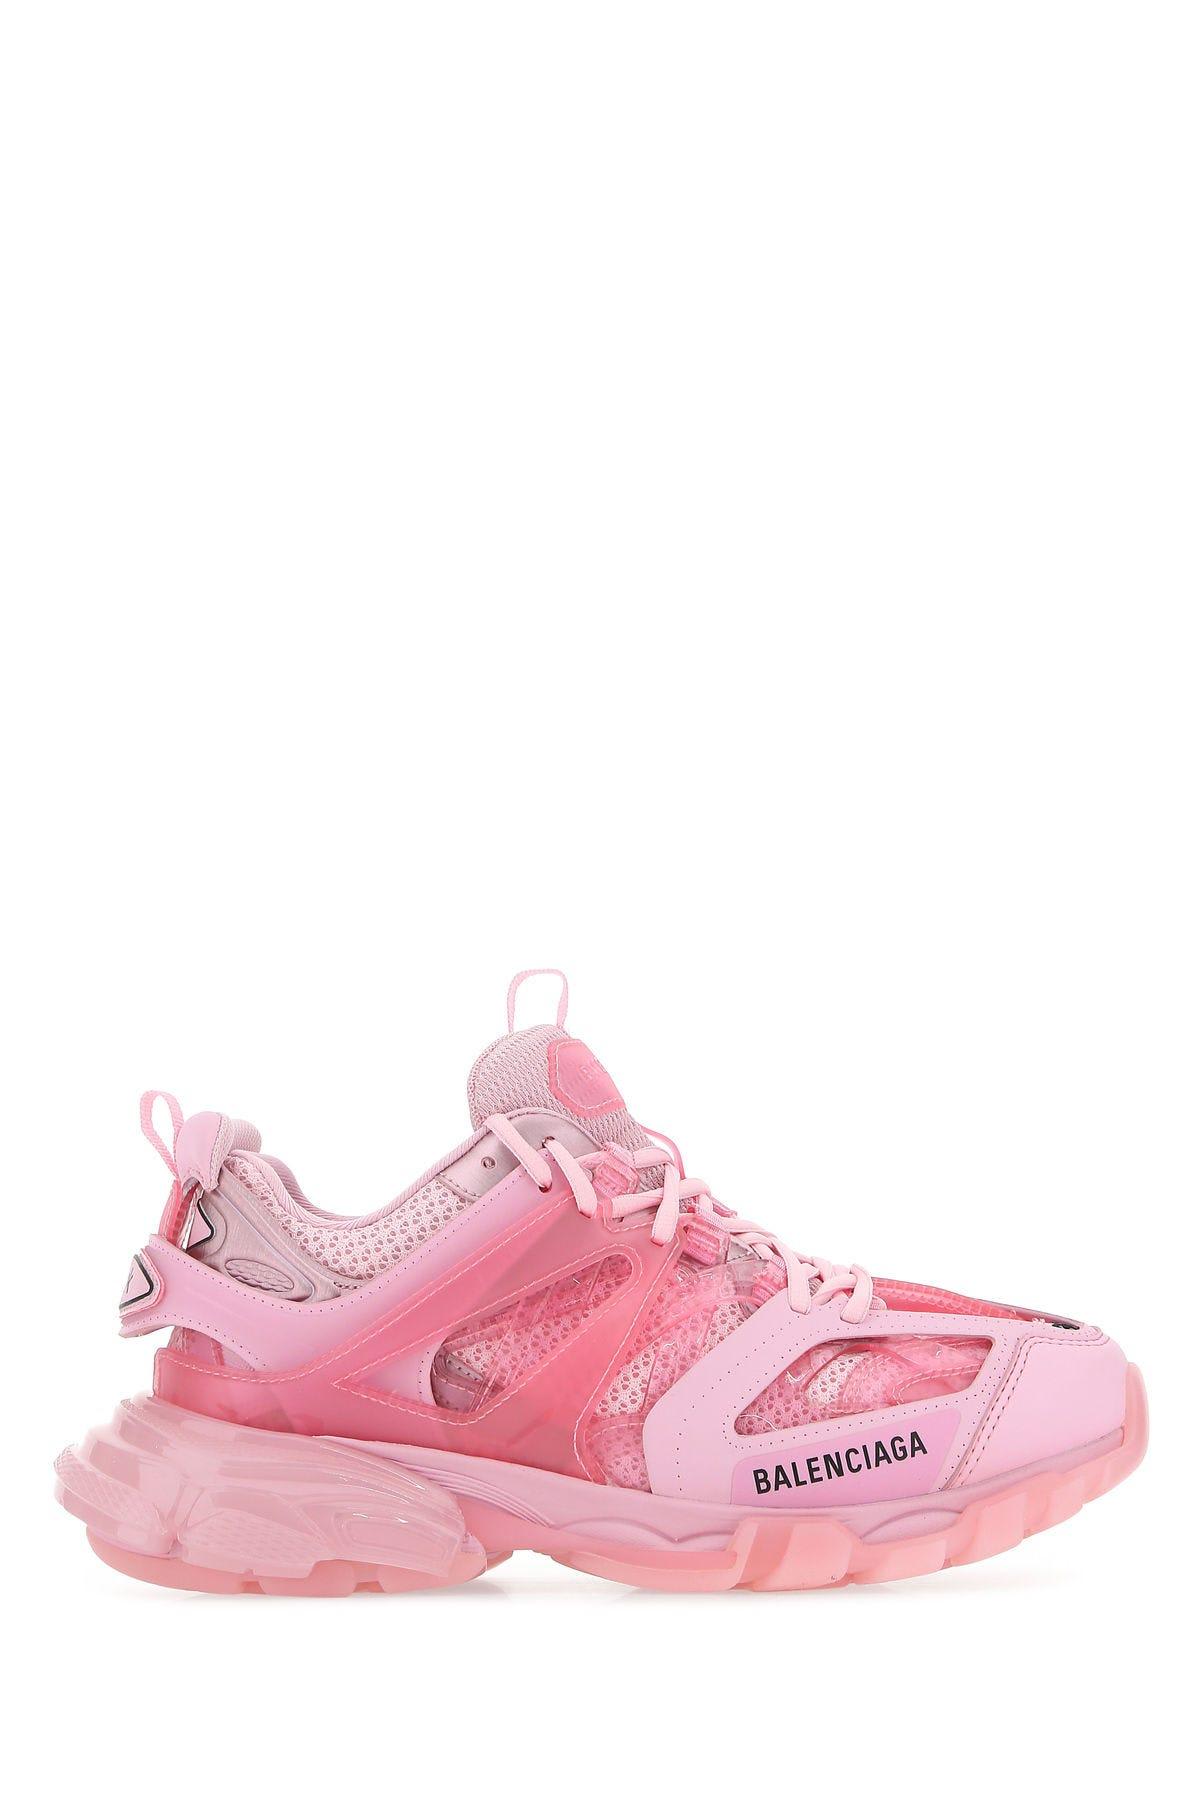 Balenciaga Pink Synthetic Leather And Fabric Sneakers